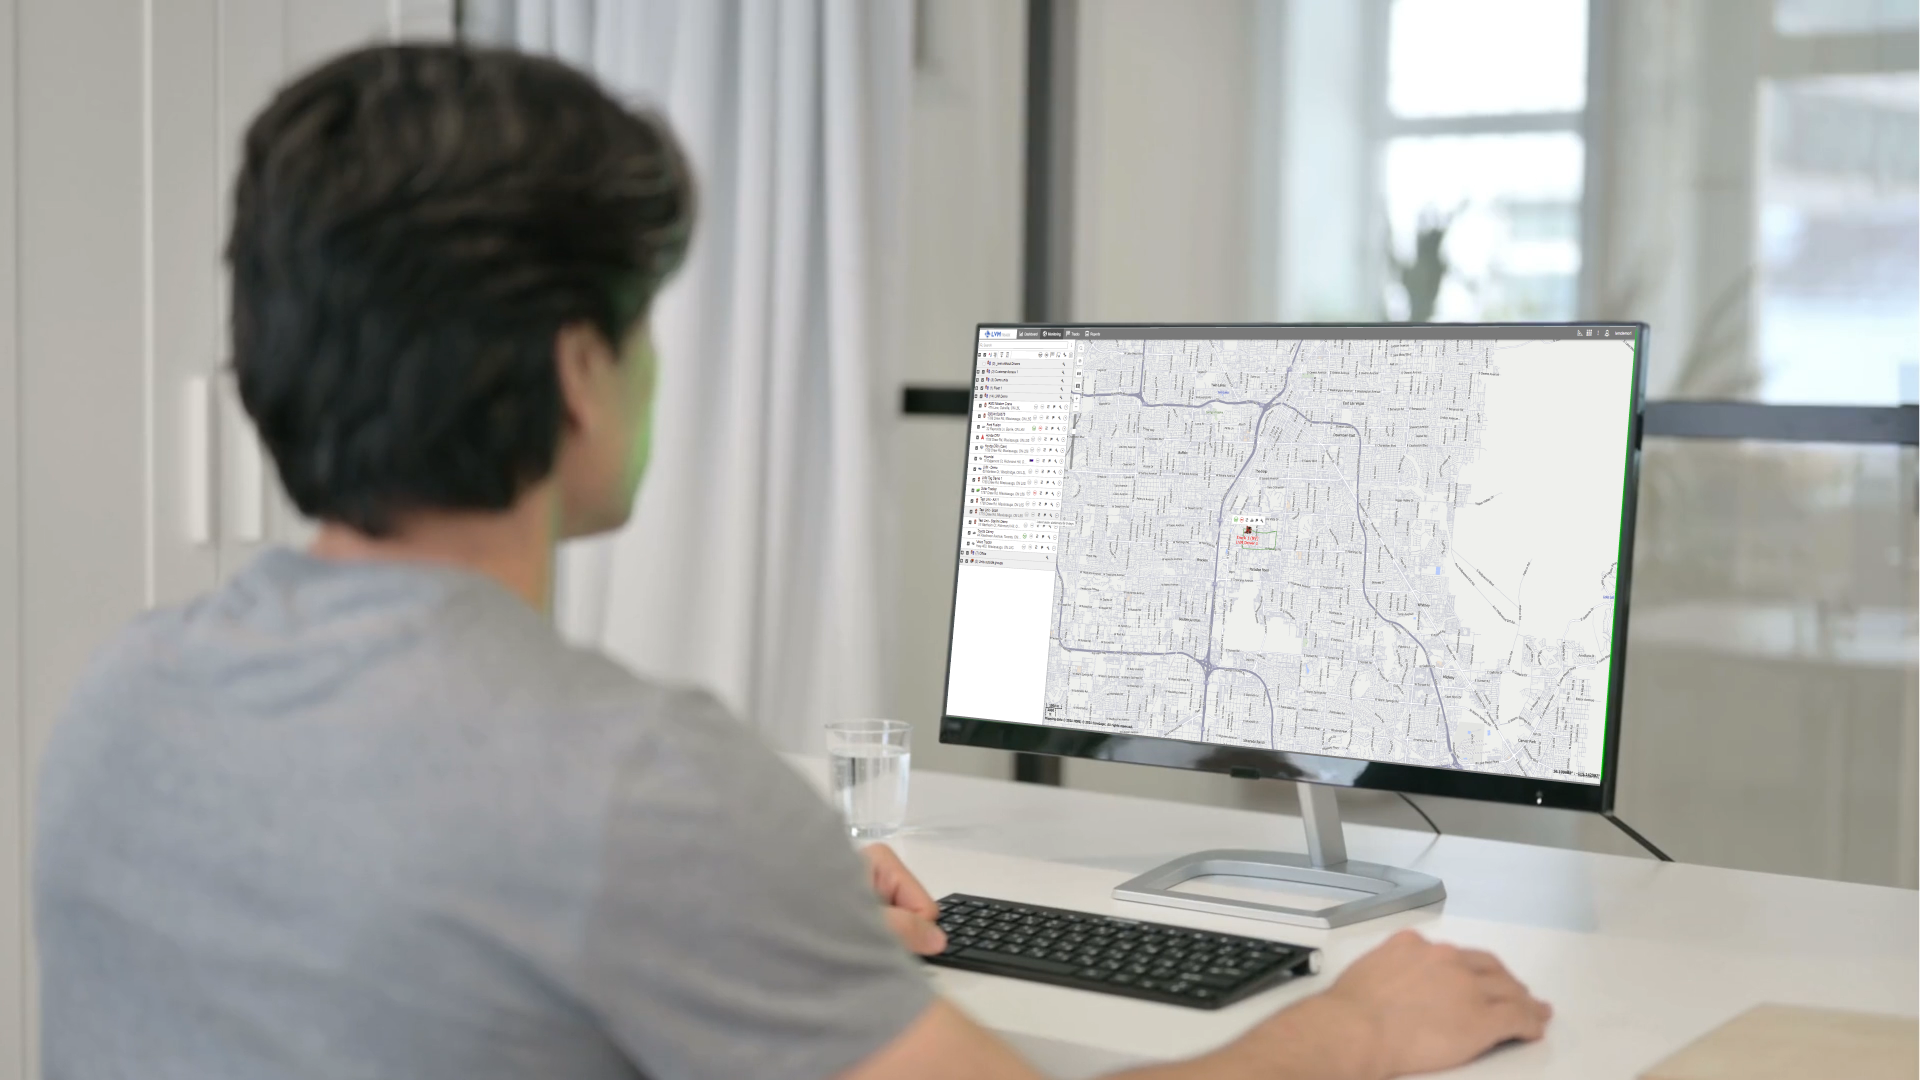 Why geofencing is crucial for fleet managers to save thousands of dollars